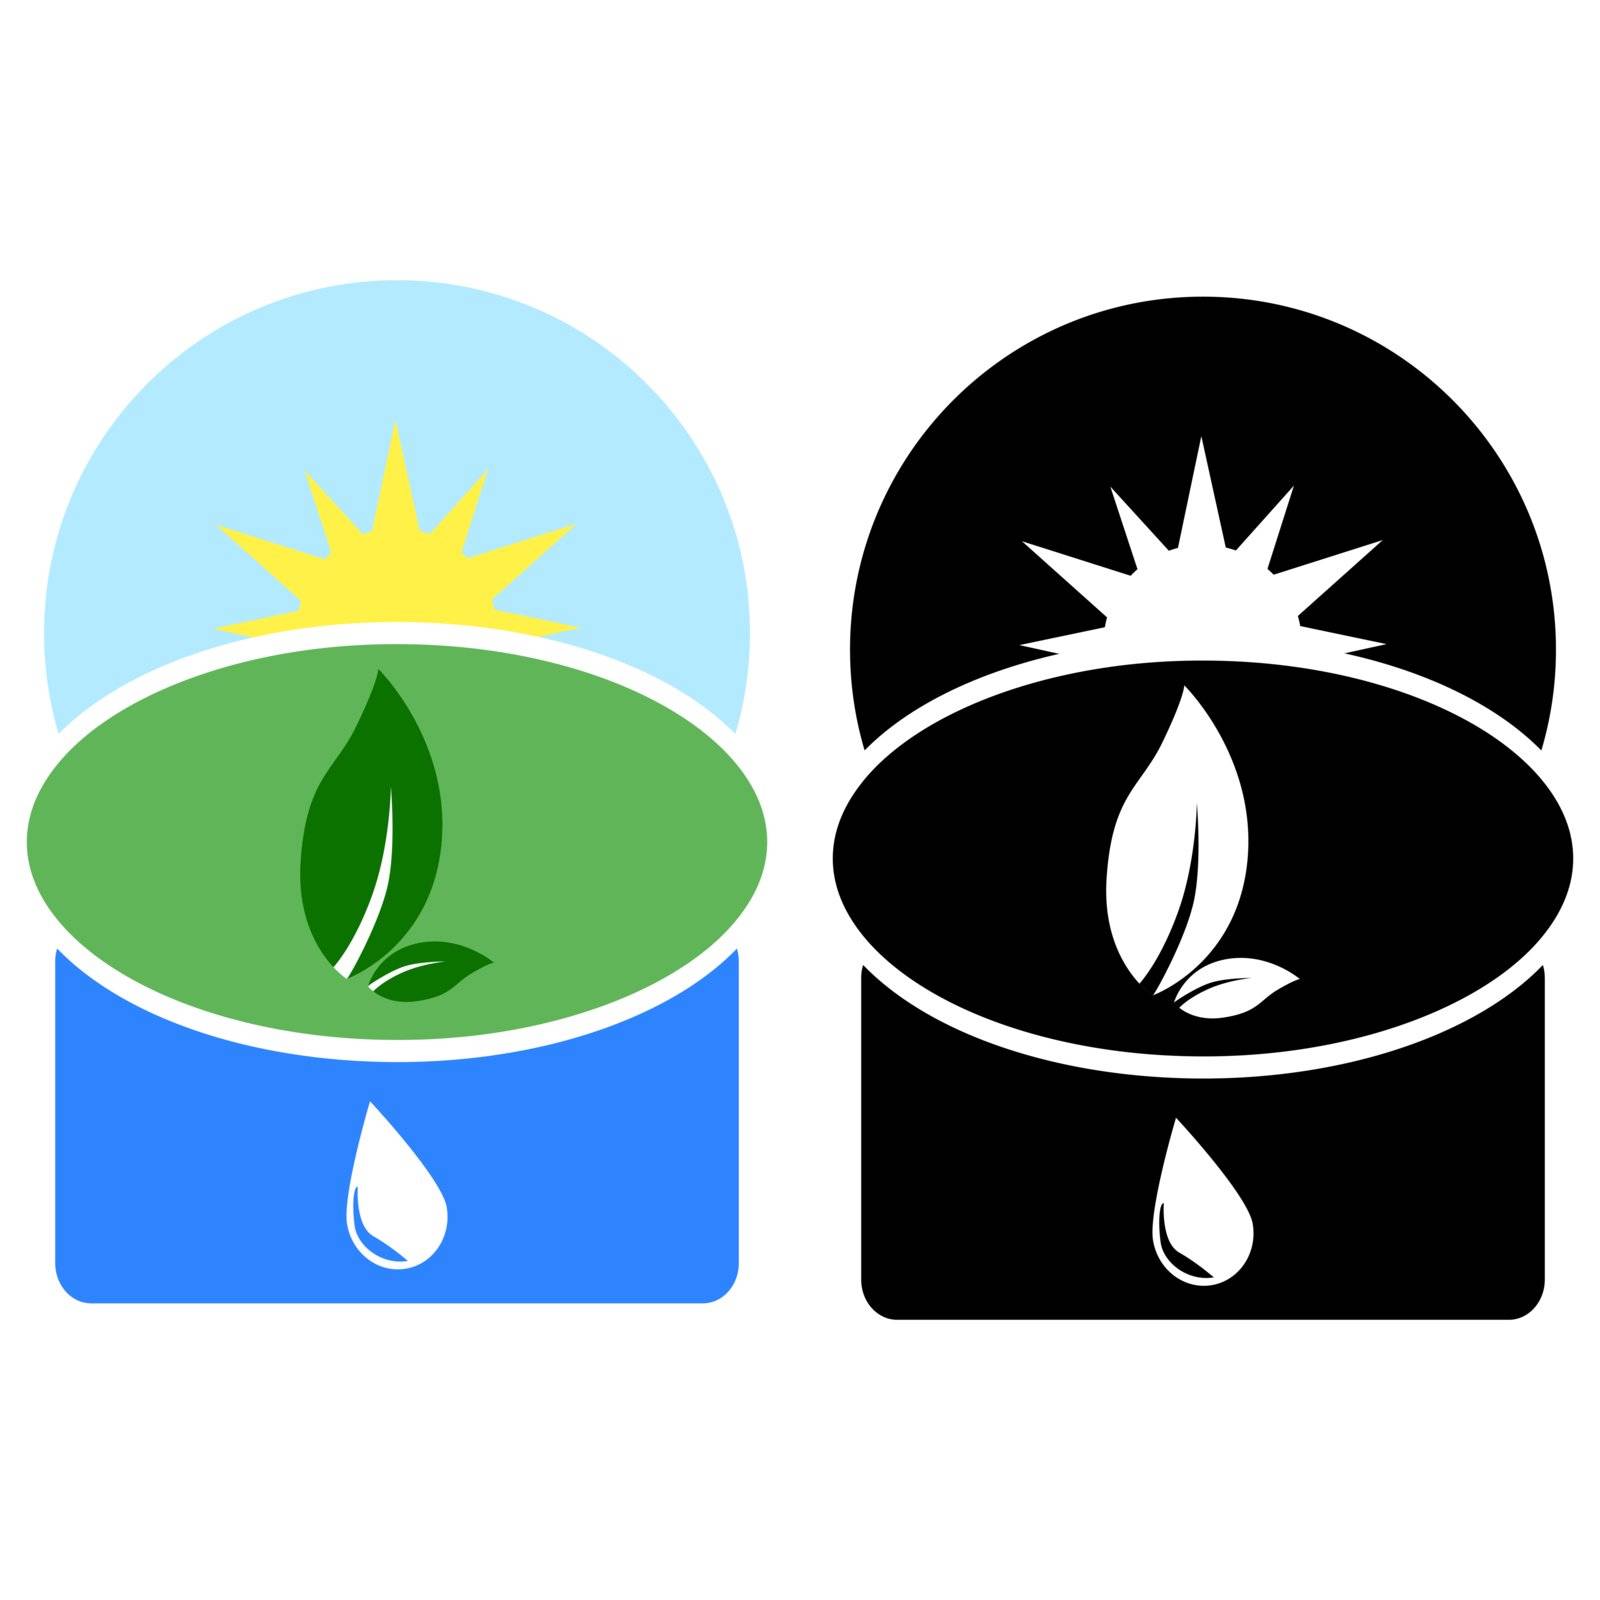 Icon showing three different natural elements: air, earth and water